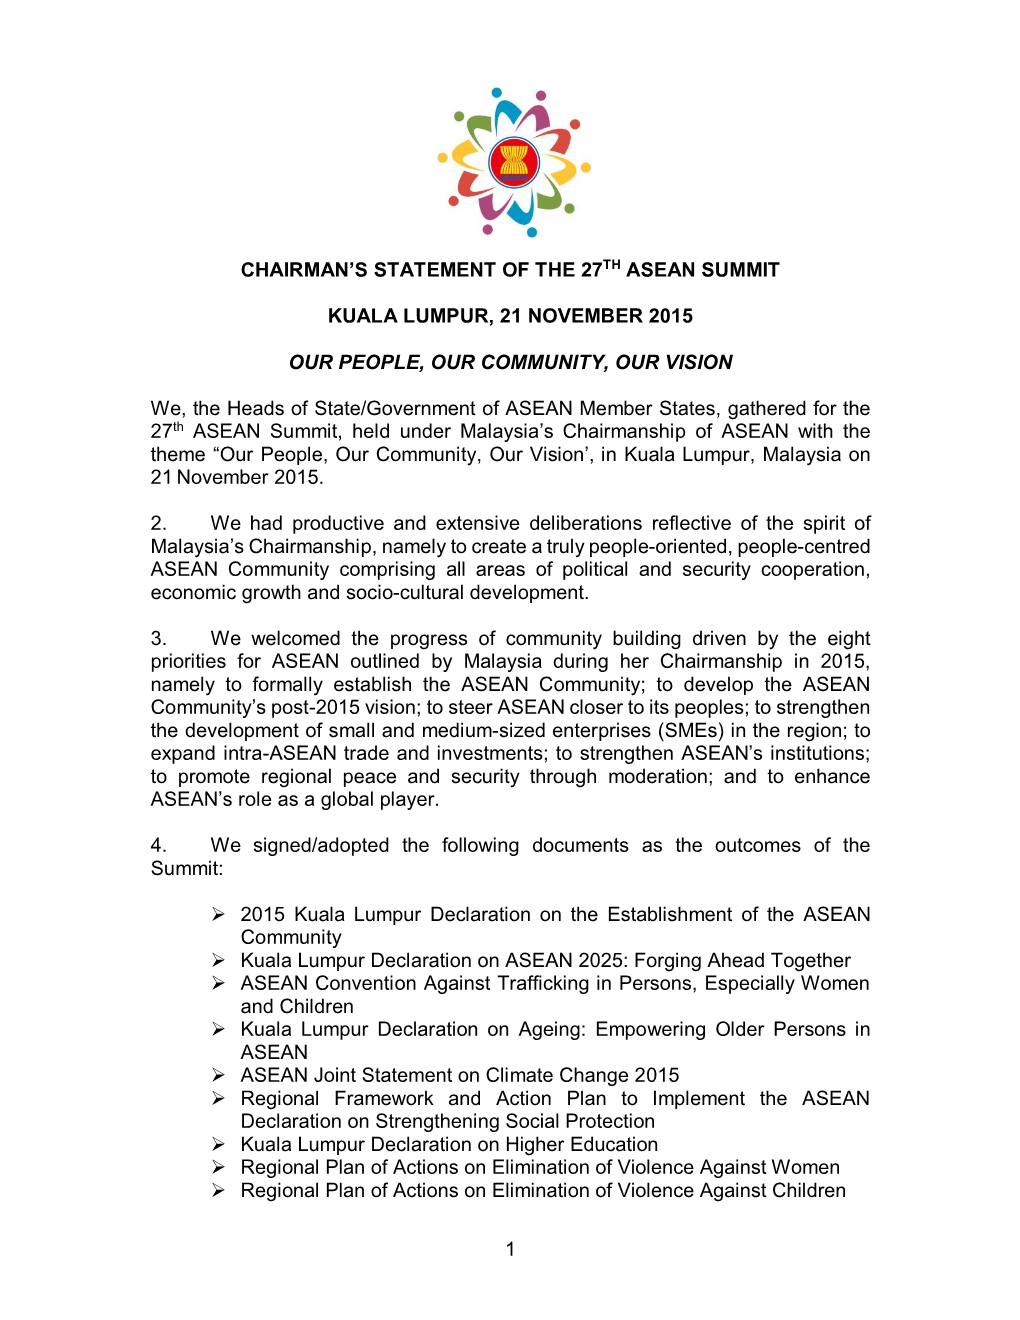 Chairman Statement of the 27Th ASEAN Summit